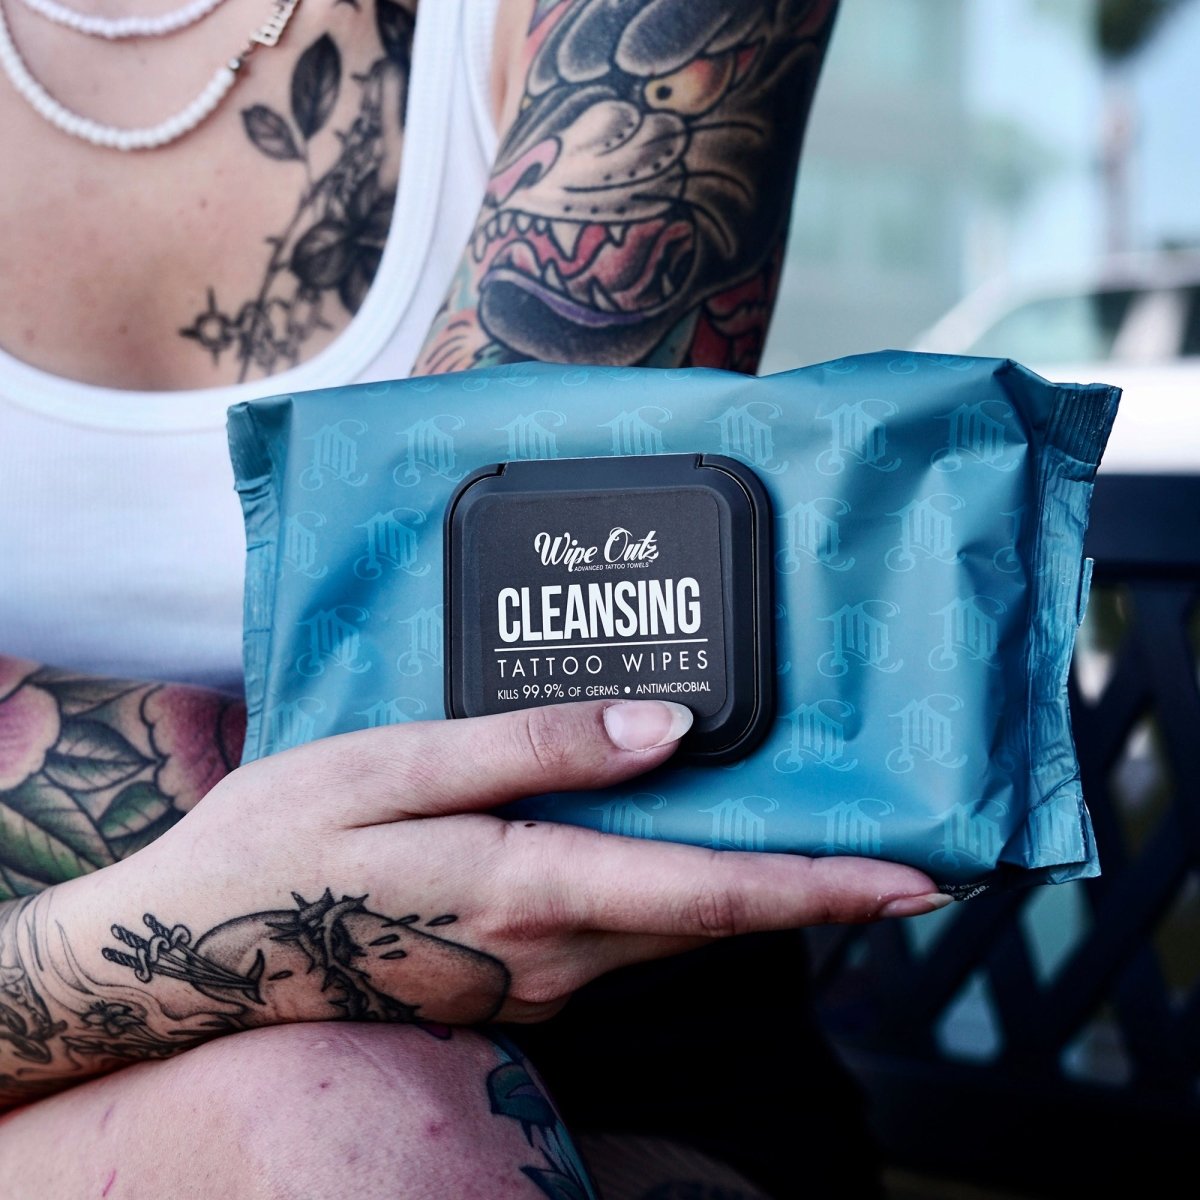 Cleansing Tattoo Wipes (40 Count) – MD Wipe Outz